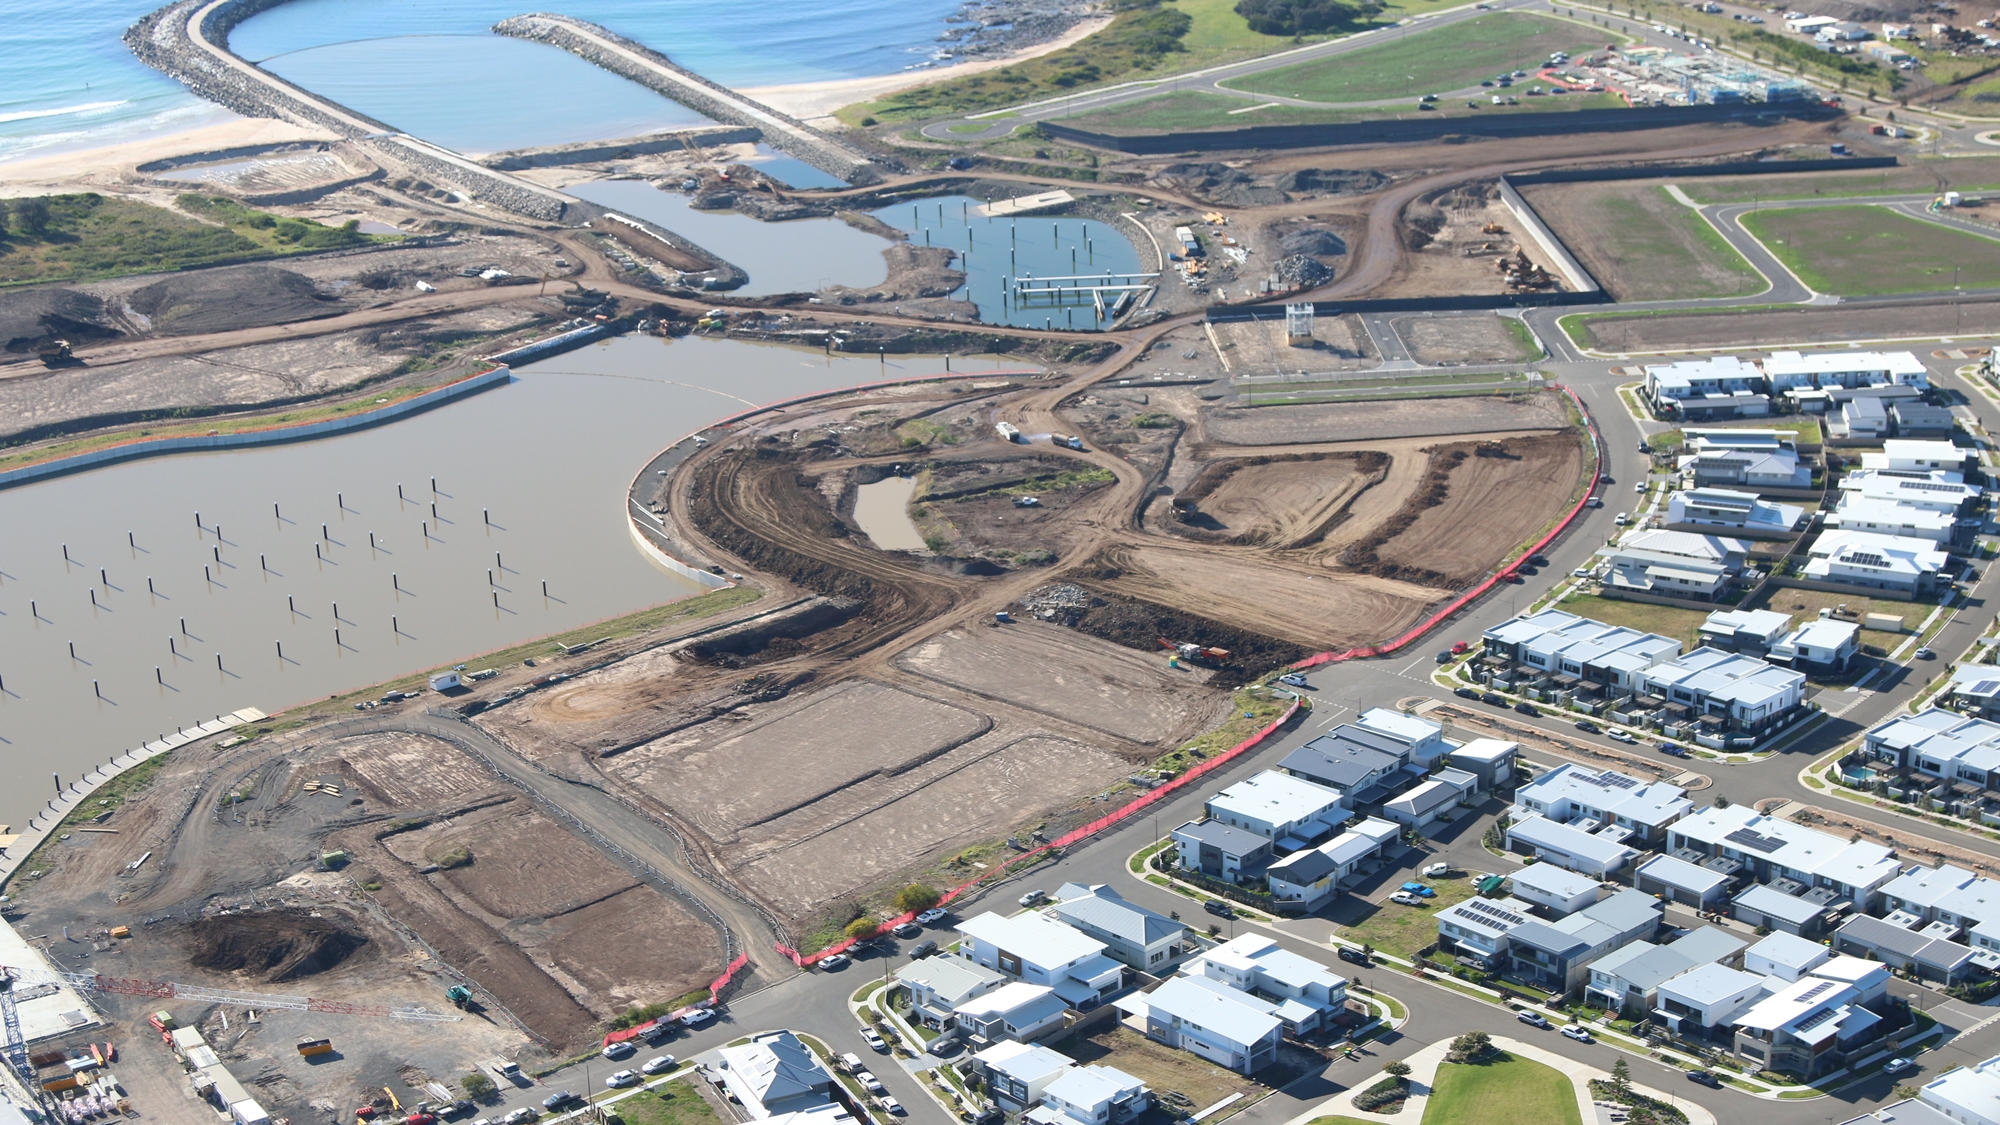 The Waterfront construction images